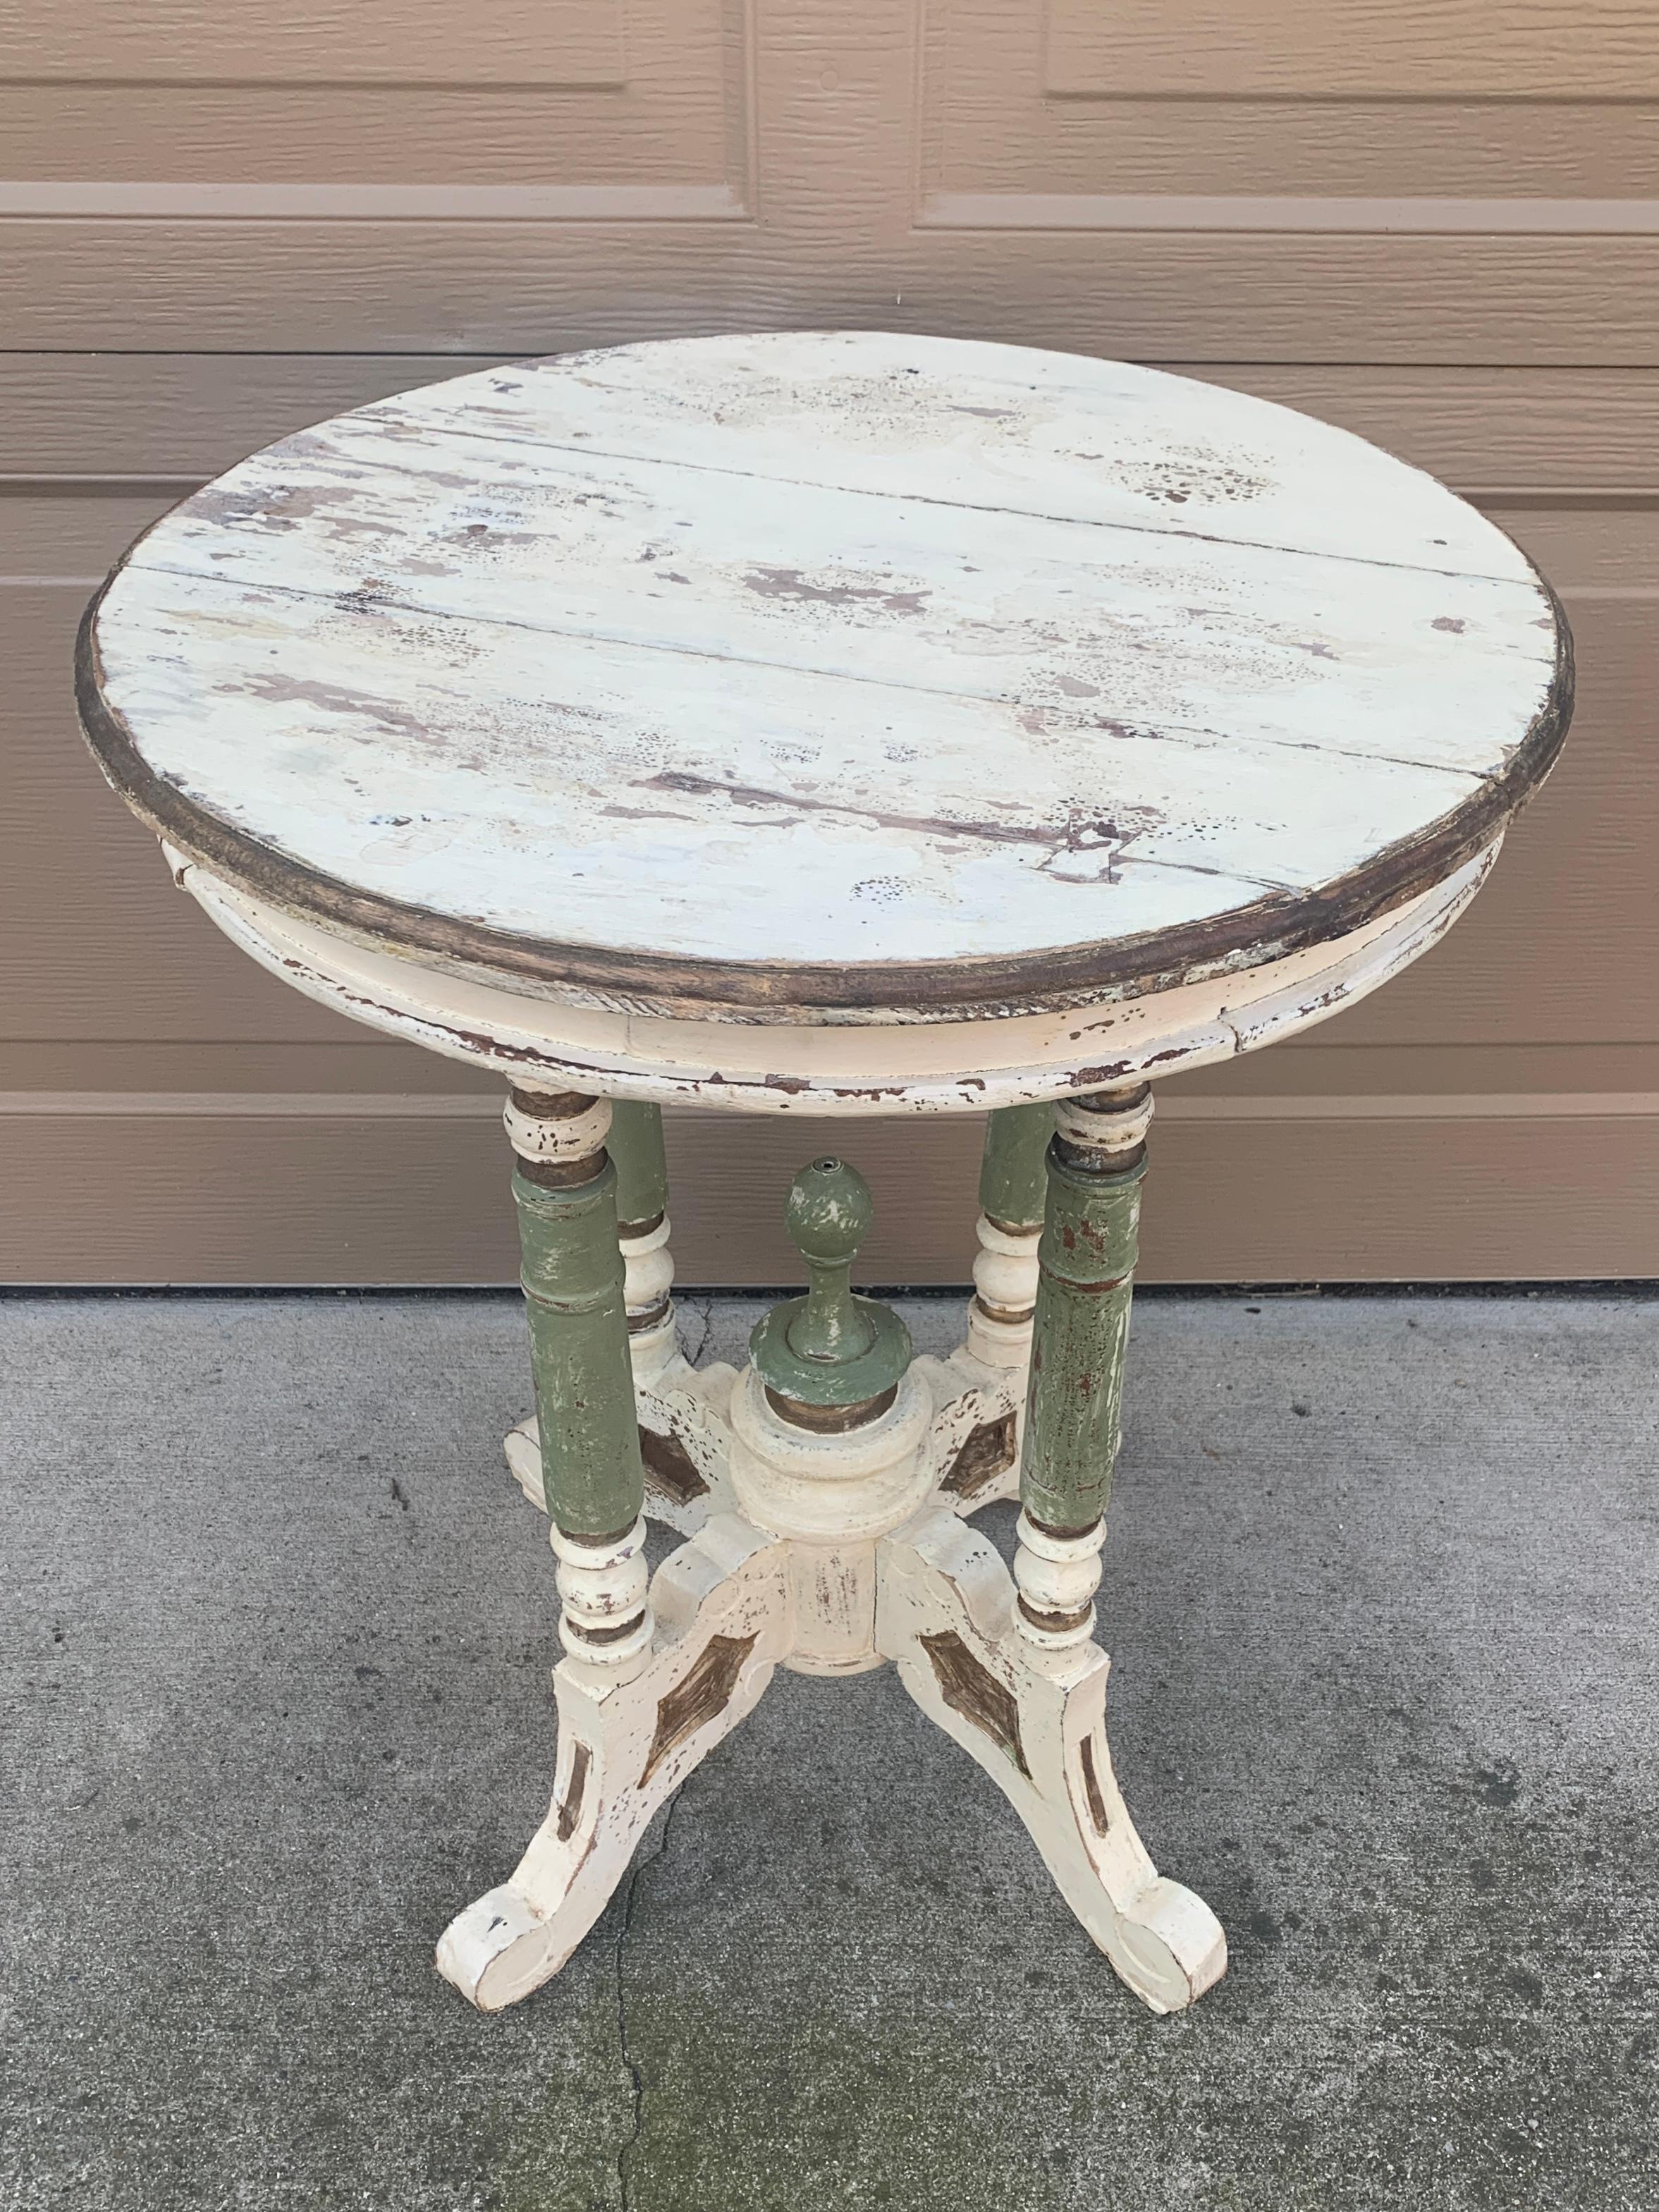 A gorgeous Victorian round side table on four legs

USA, Circa late 19th century

Painted carved walnut in antique white, light green, and gold.

Measures: 19.5